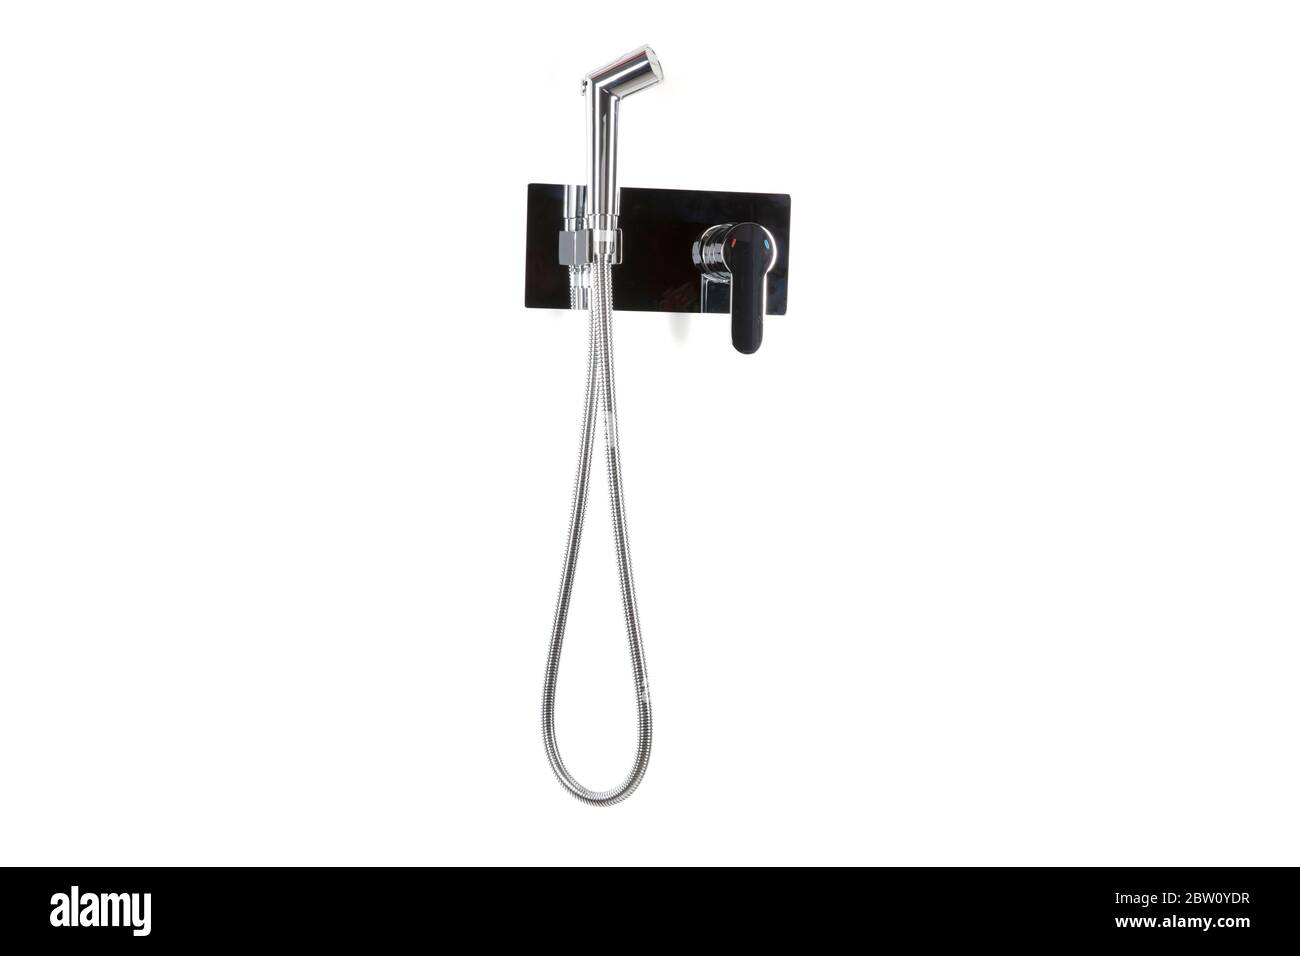 Shattaf bidet shower head attached to a toilet in the uk alternative to  toilet roll tissue during coronavirus outbreak Stock Photo - Alamy